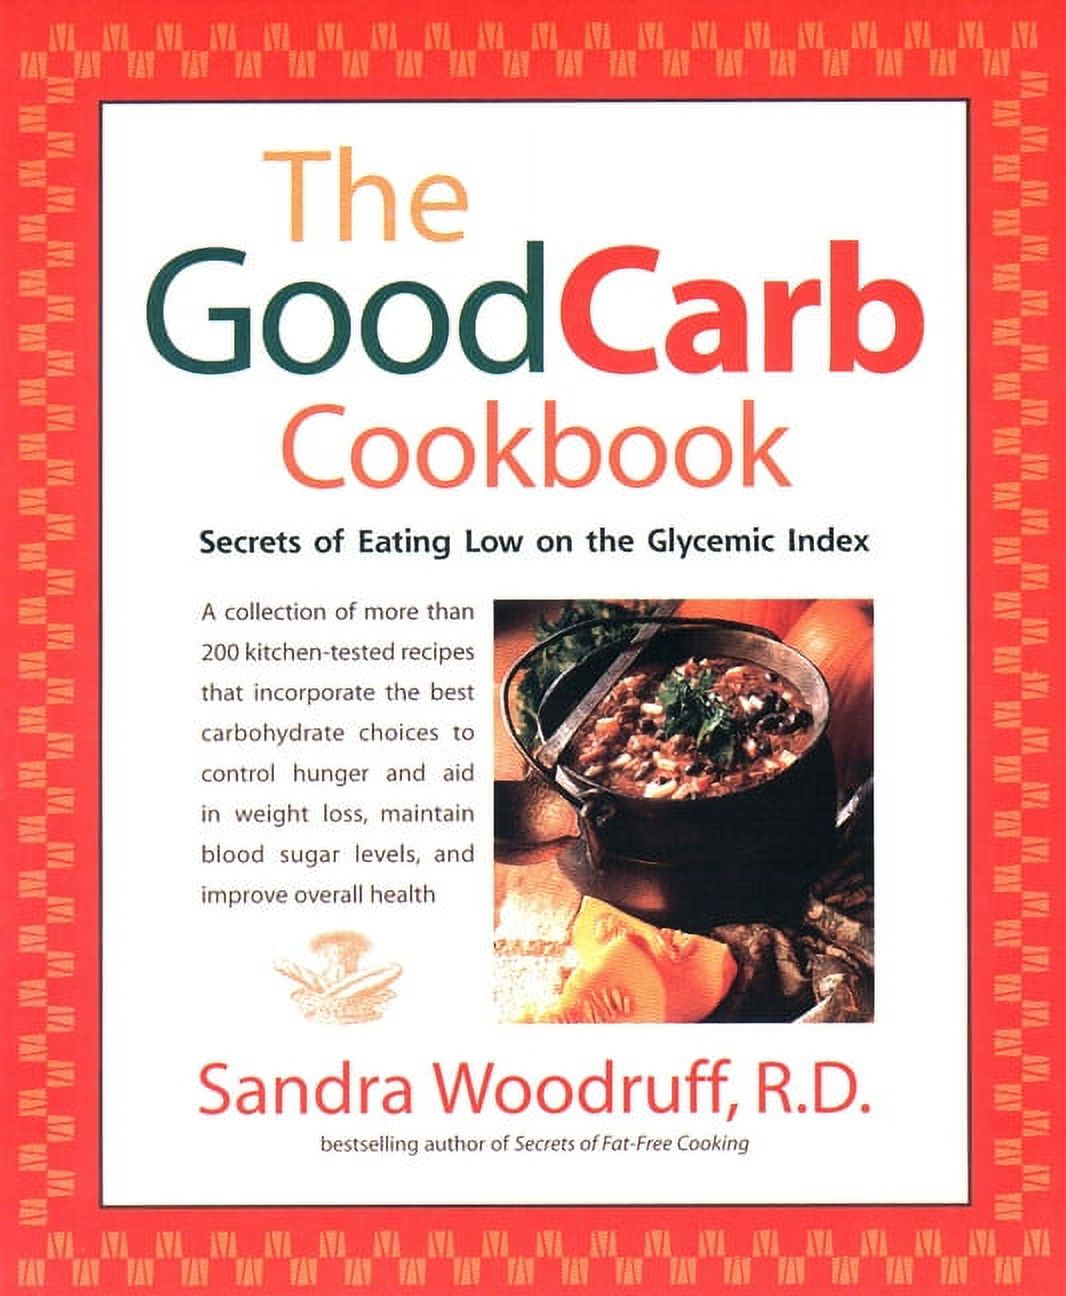 The Good Carb Cookbook : Secrets of Eating Low on the Glycemic Index (Paperback) - image 1 of 1